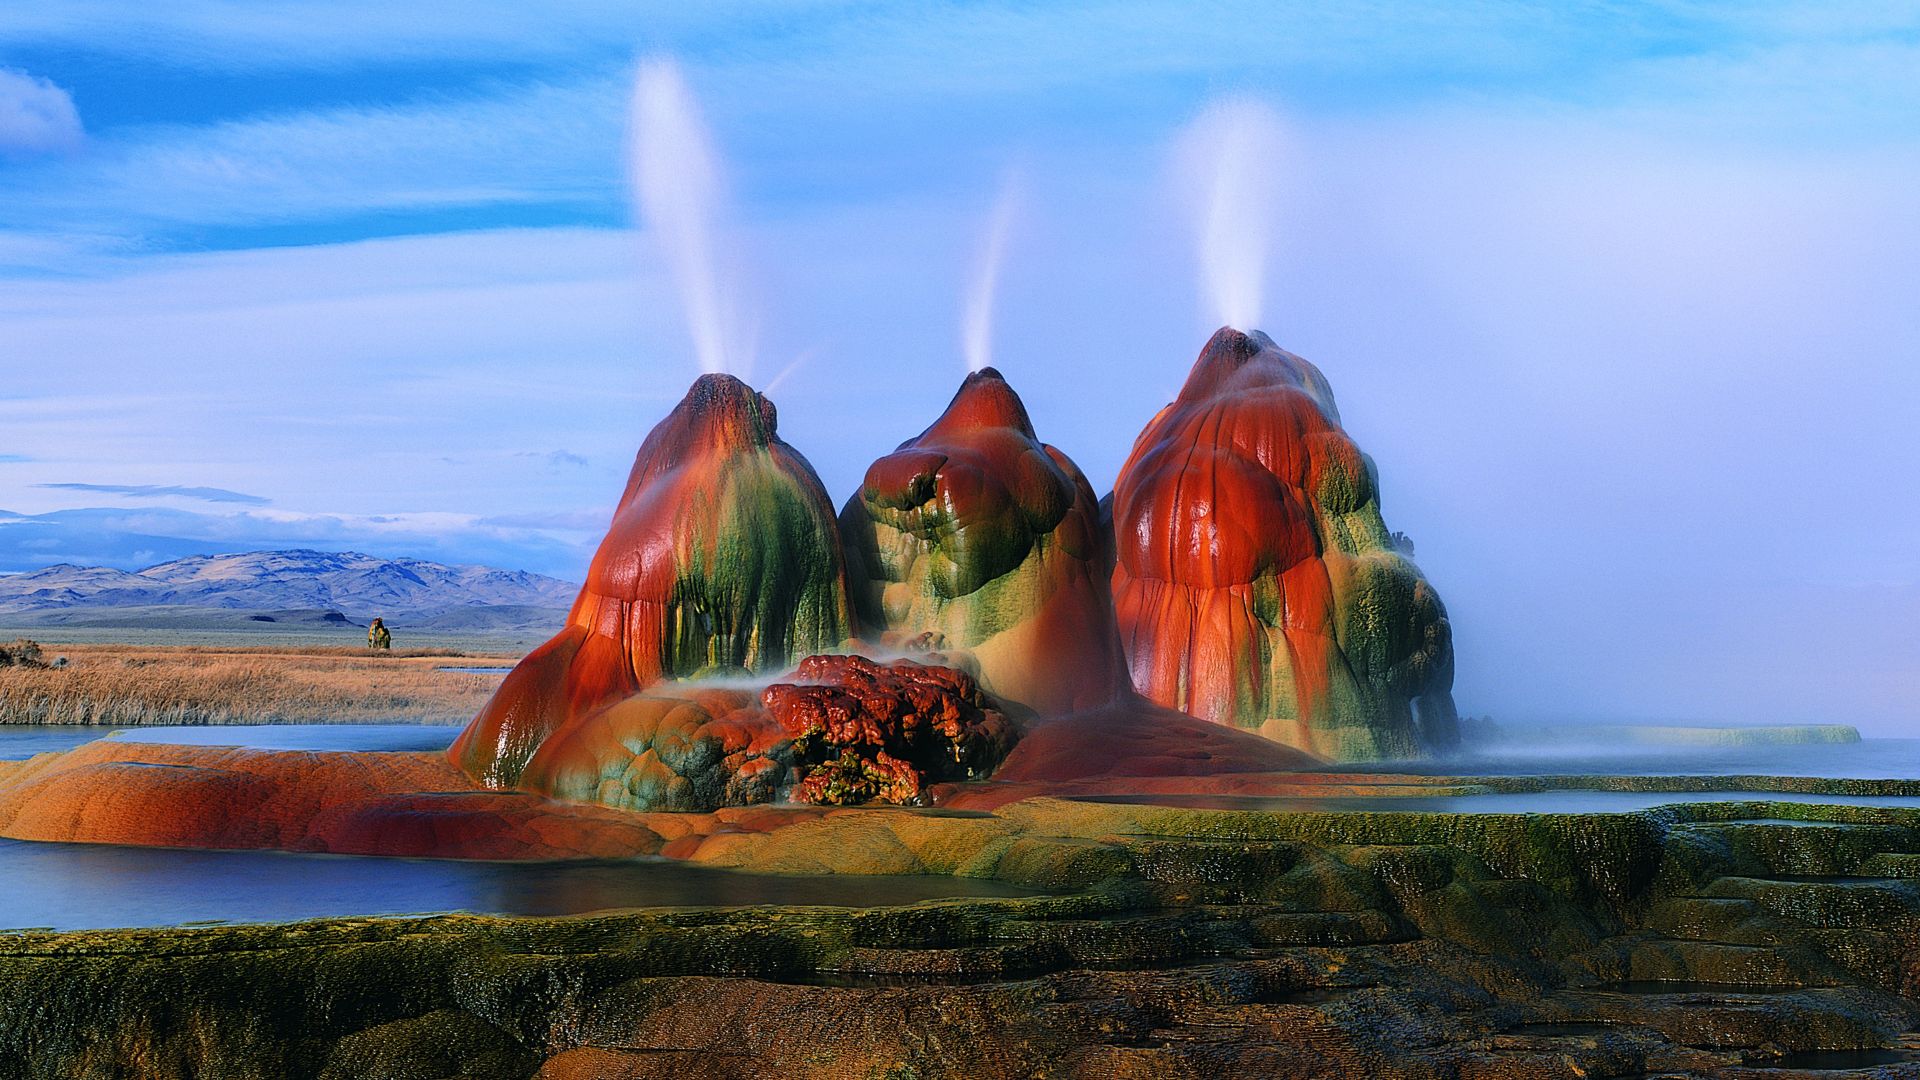 <p>                     What do you get if you cross human error and geothermal pressure? A 12-ft-tall (3.5 meters) alien-looking structure.                    </p>                                      <p>                     Fly Geyser is a technicolor geyser situated on Fly Ranch in the middle of the Nevada desert. The structure spews out hot water, creating shallow pools home to hardy thermophilic algae that flourish in moist, hot environments, according to the tourism website Reno Tahoe.                    </p>                                      <p>                     The geyser was created by accident in 1964 when a geothermal energy company drilled the site in a bid to tap into the hot water below. But the water wasn't hot enough to be useful to the energy company, so the site was sealed up. According to Reno Tahoe, the well was improperly plugged and the scalding hot water pierced through the surface, creating the bizarre three-mound geyser we see today.                   </p>